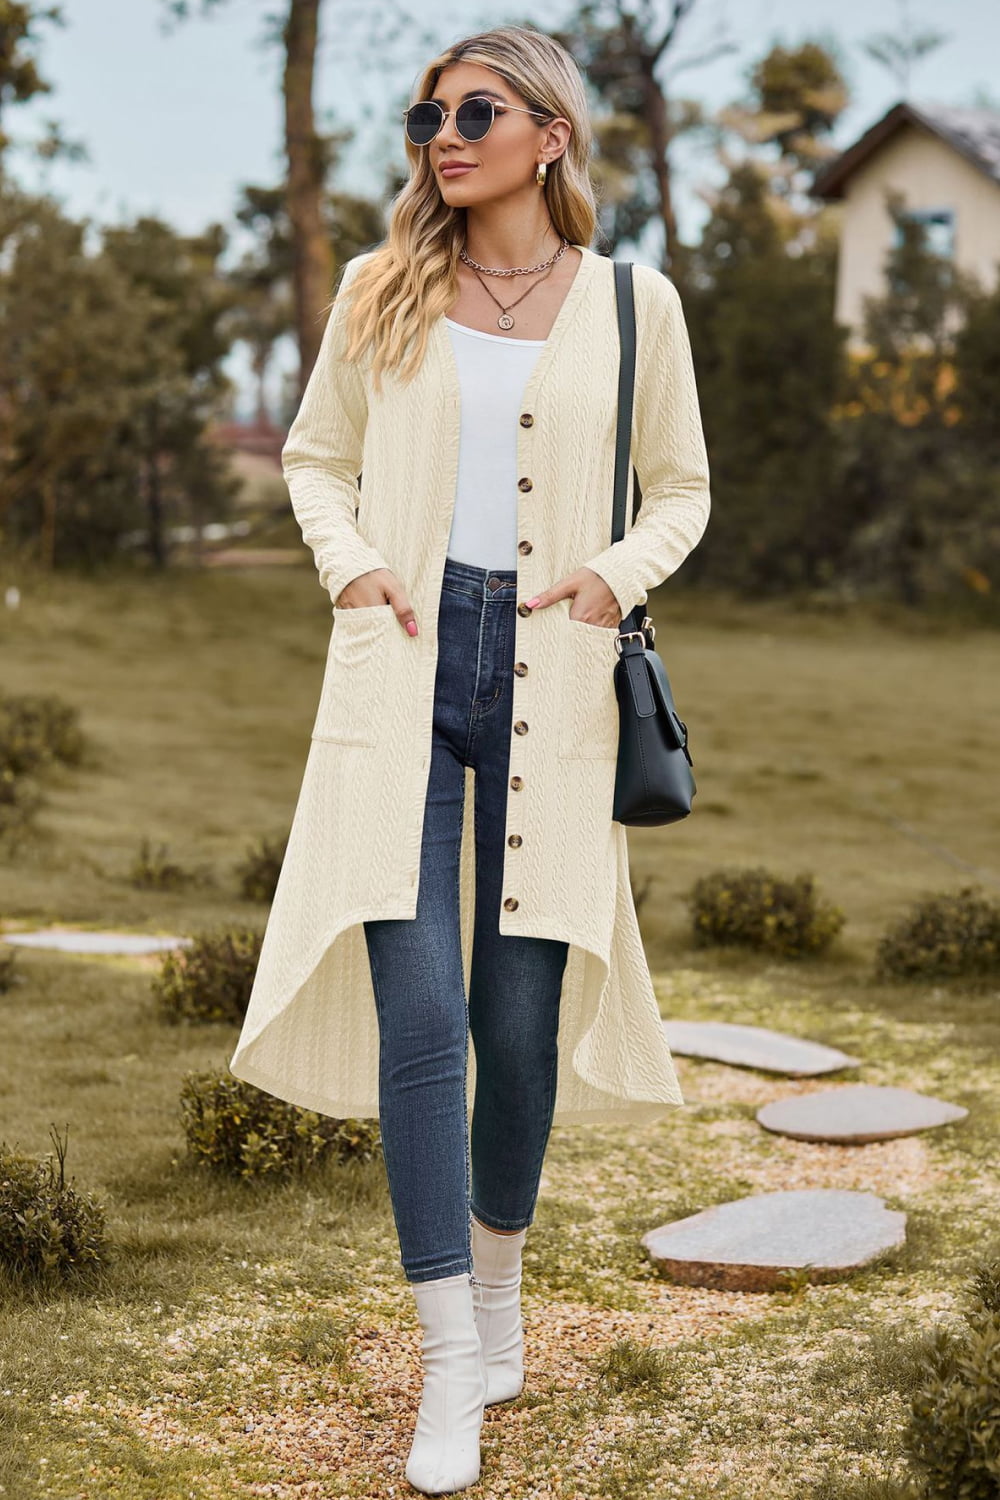 V-Neck Long Sleeve Cardigan with Pocket - Women’s Clothing & Accessories - Shirts & Tops - 12 - 2024